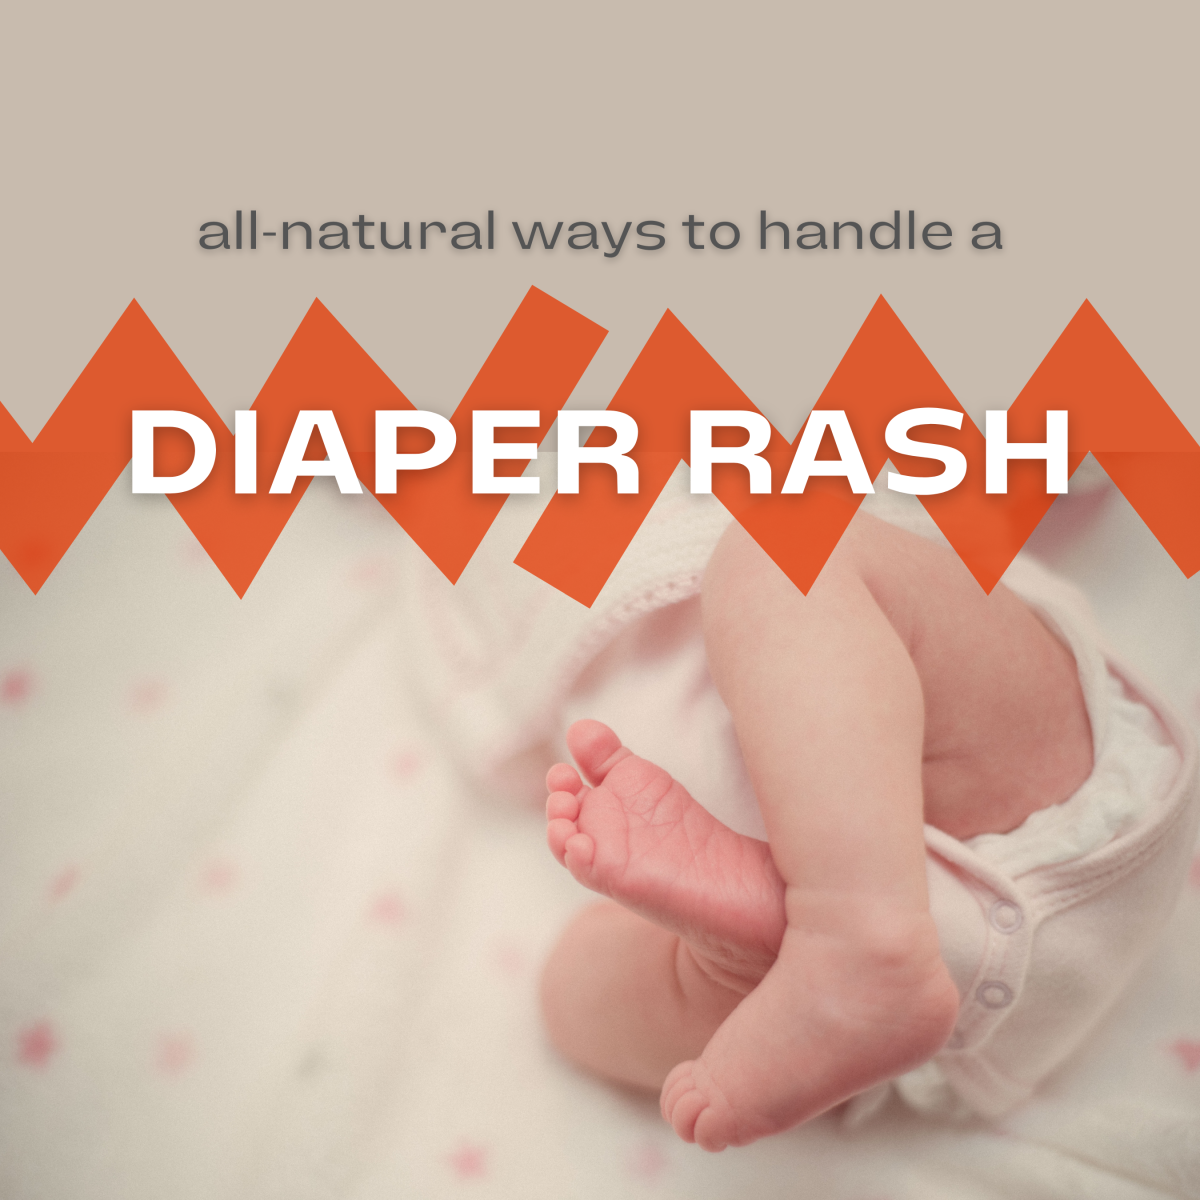 All-Natural Methods to Treat a Diaper Rash